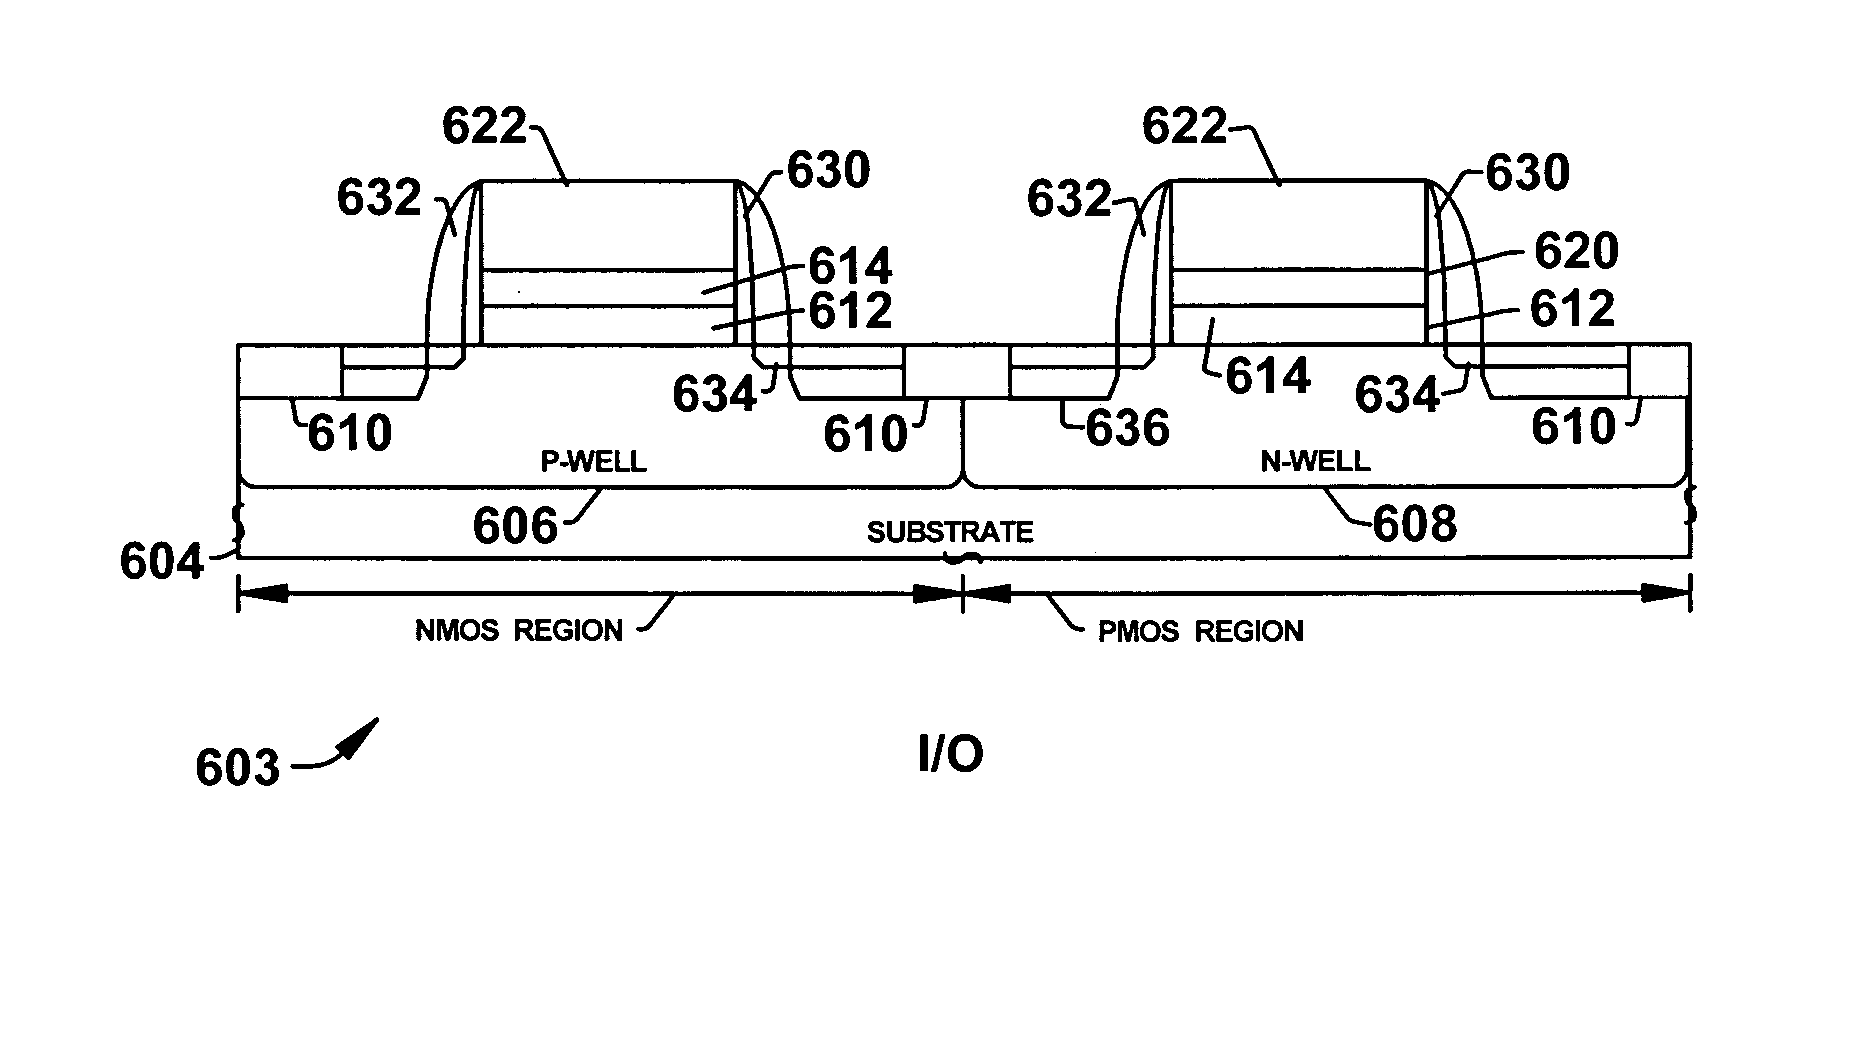 Semiconductor CMOS devices and methods with NMOS high-k dielectric formed prior to core PMOS silicon oxynitride dielectric formation using direct nitridation of silicon